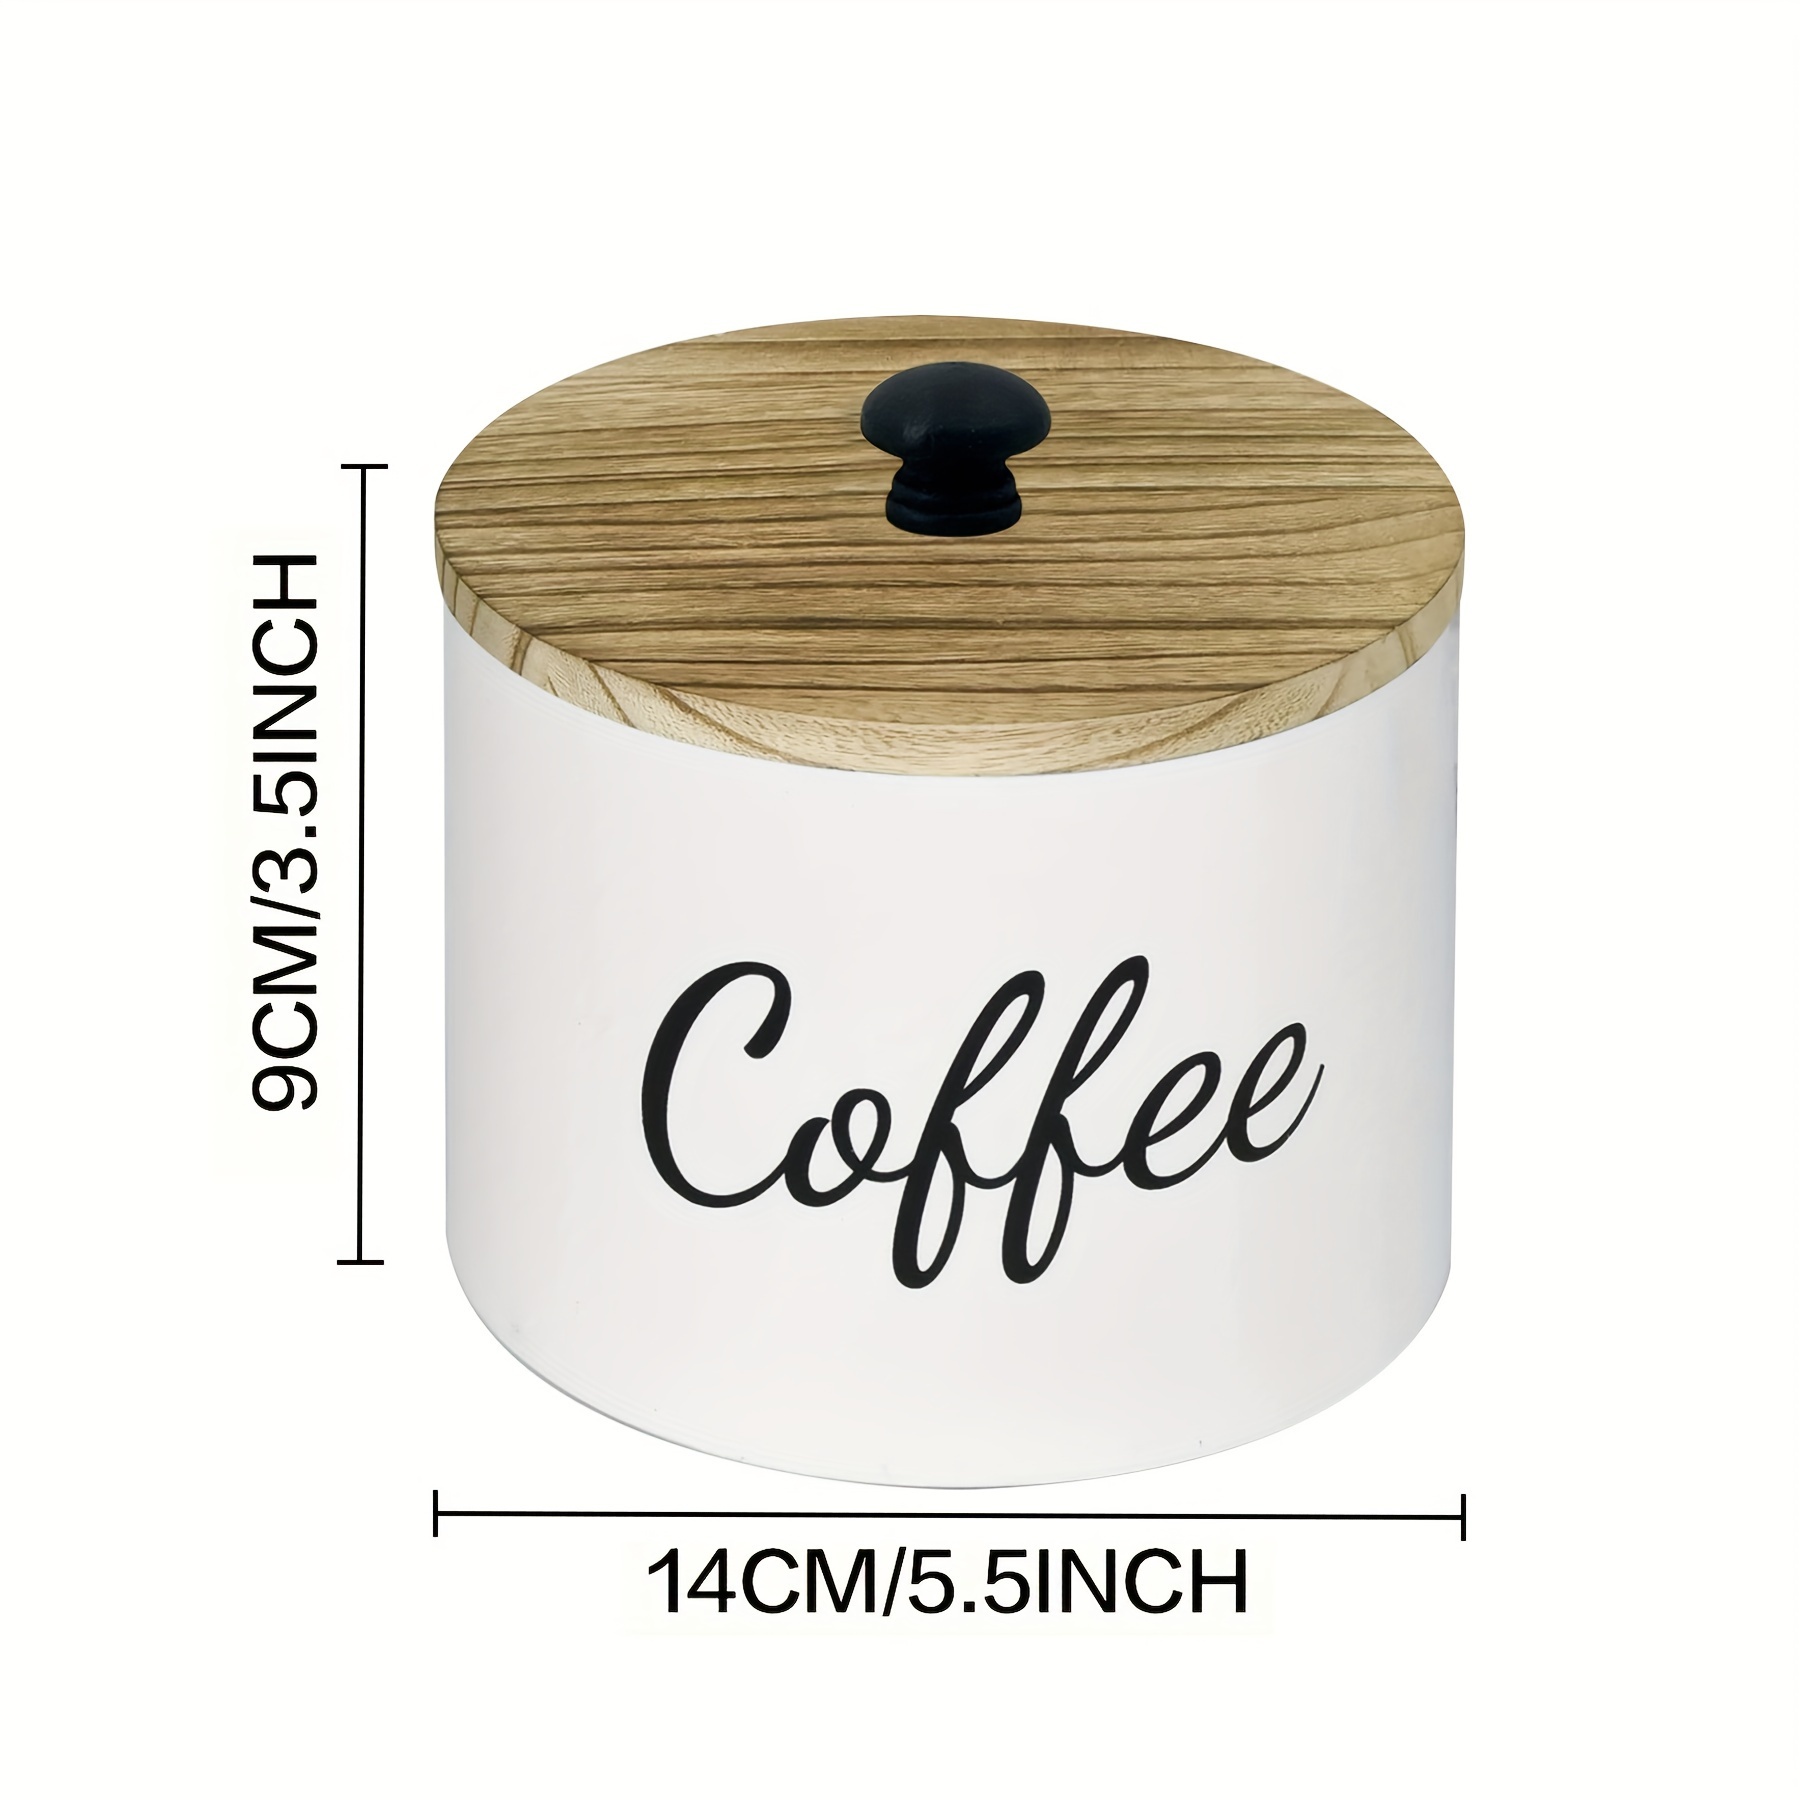 1pc Wood Coffee Pod Holder With Lid, Coffee Station Organizer For Counter,  Coffee Filter Holder Coffee Filter Storage Container, Home Decor, New Year